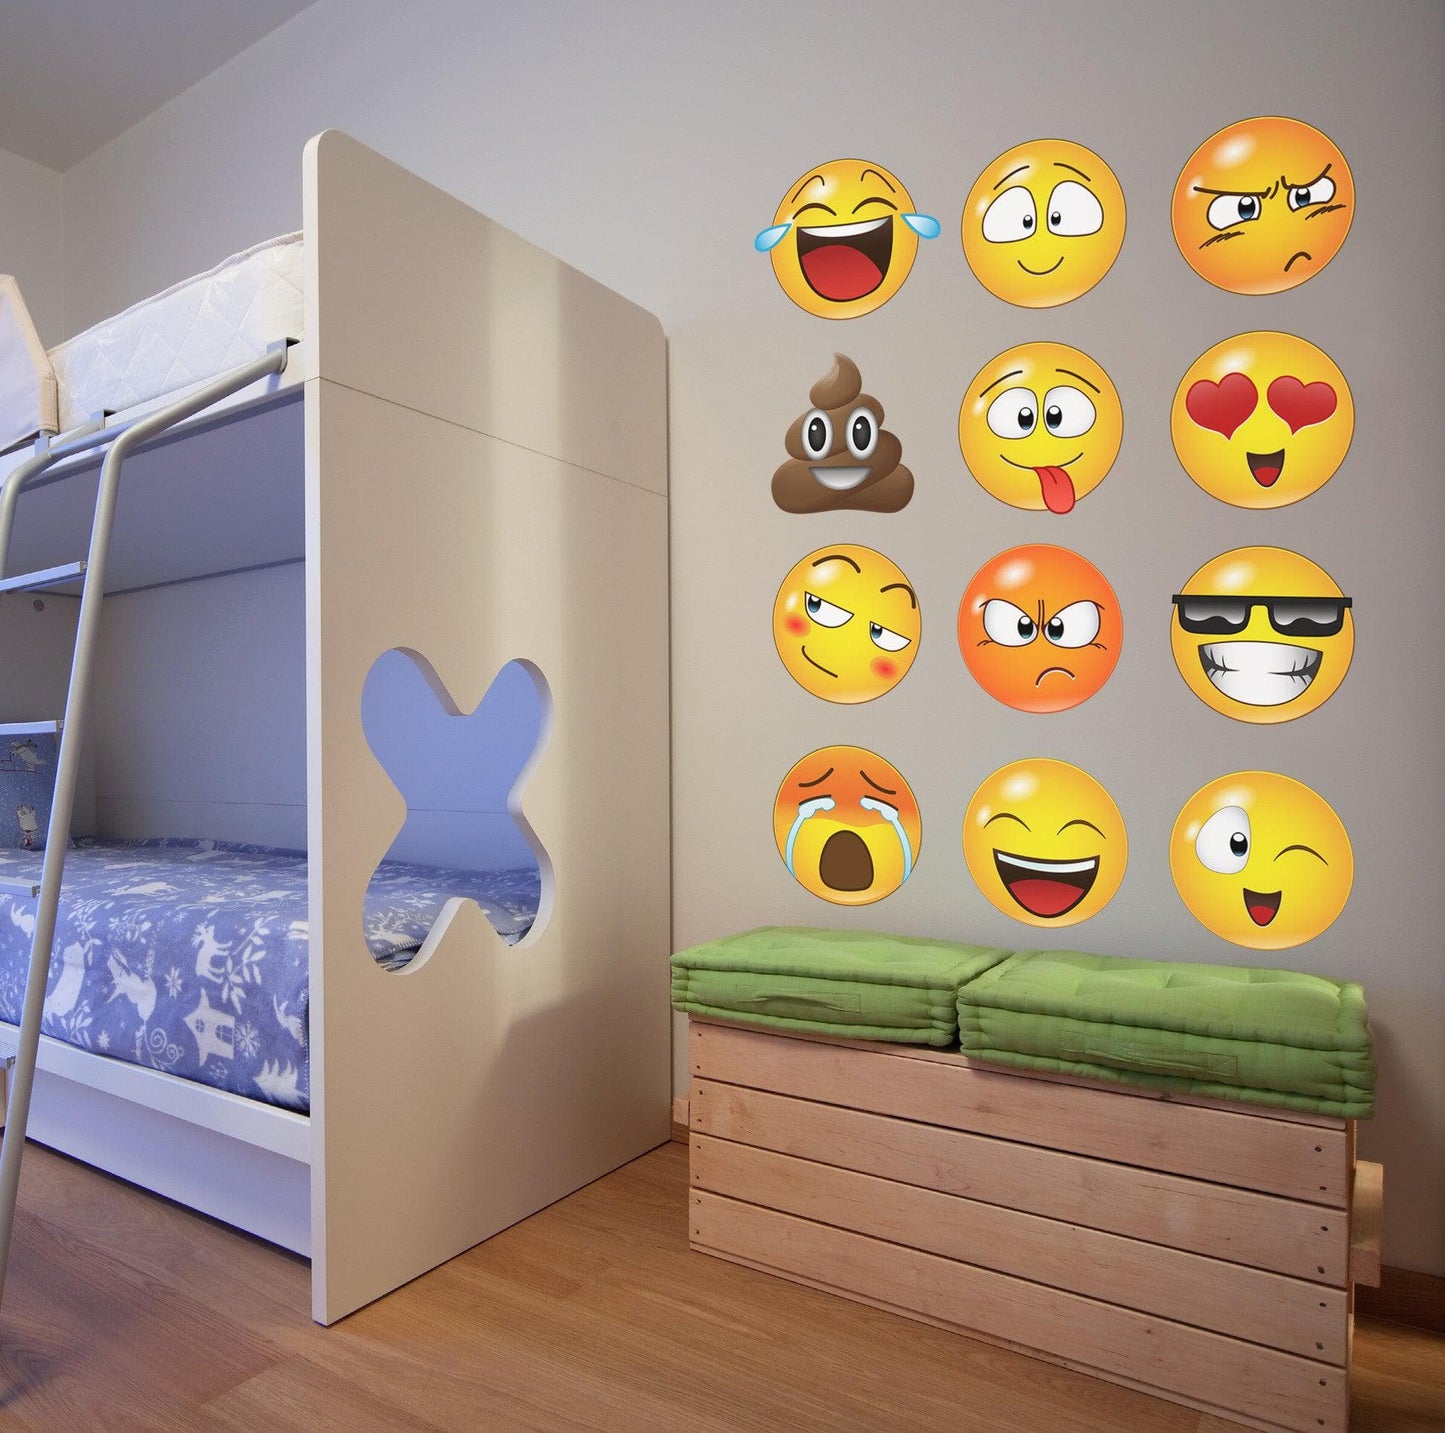 Smiling Emoticon Faces Wall Decal Sticker #6052